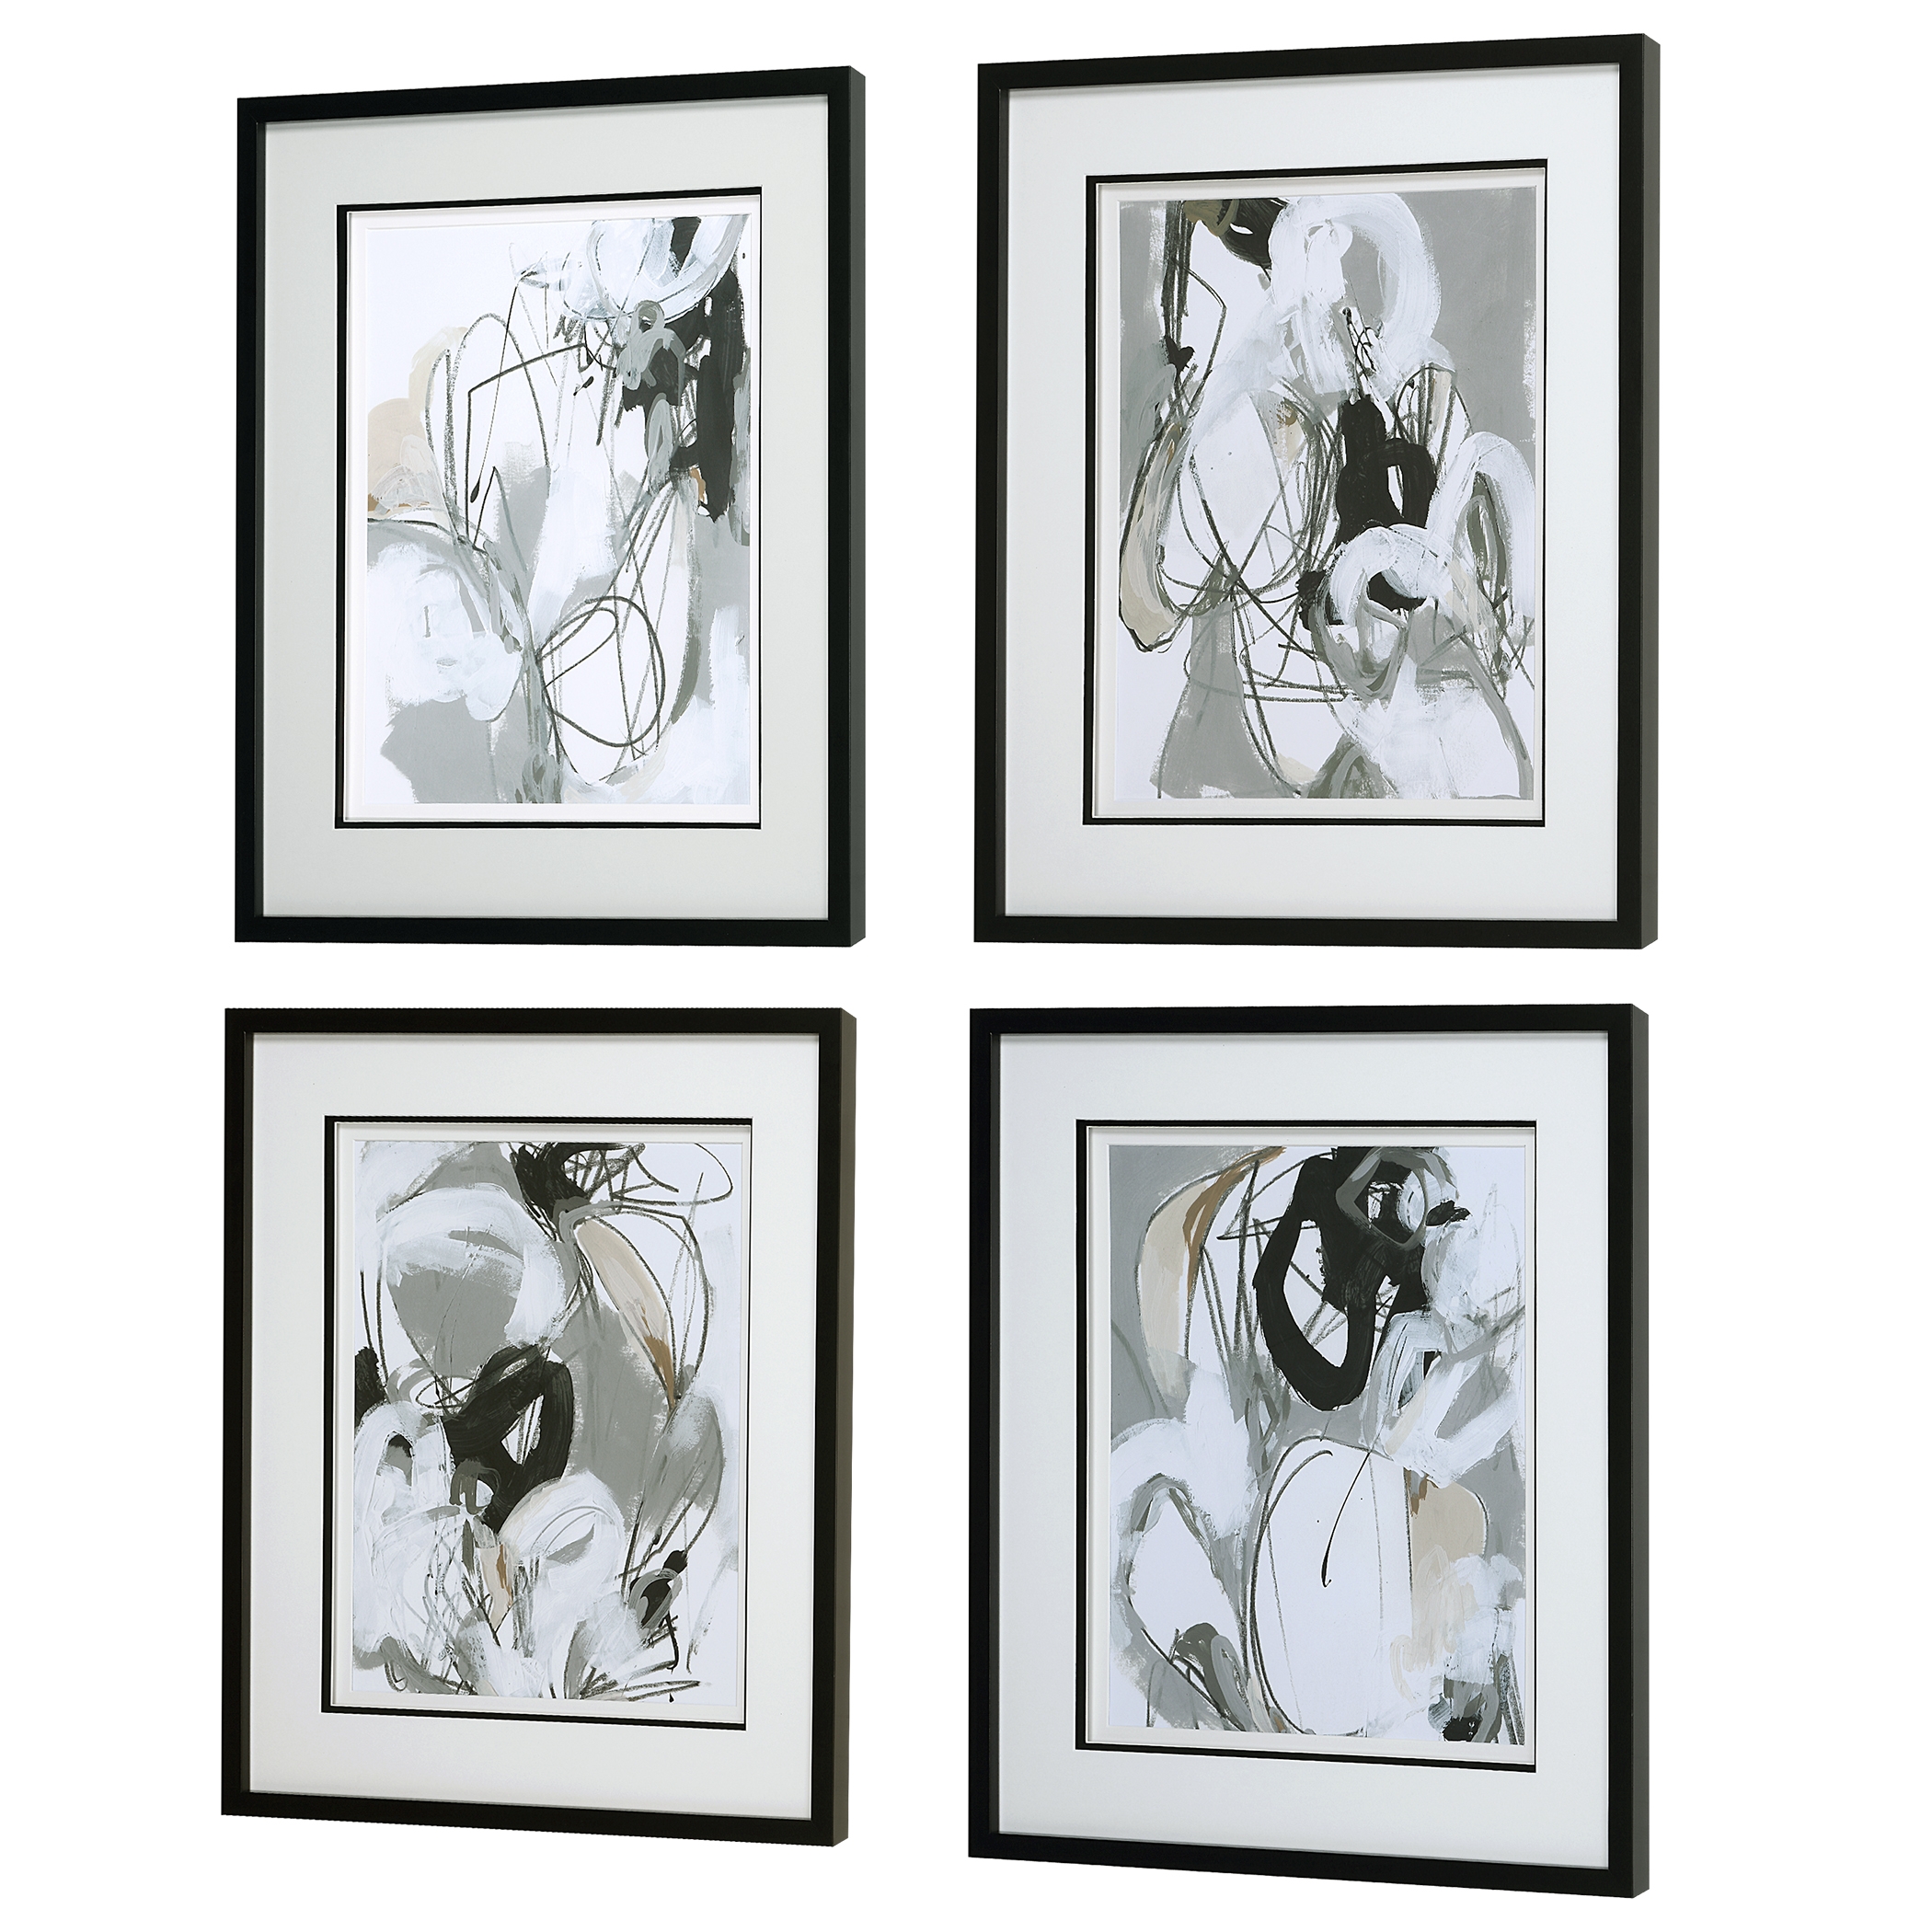 Tangled Threads Abstract Framed Prints, S/4 - Image 2